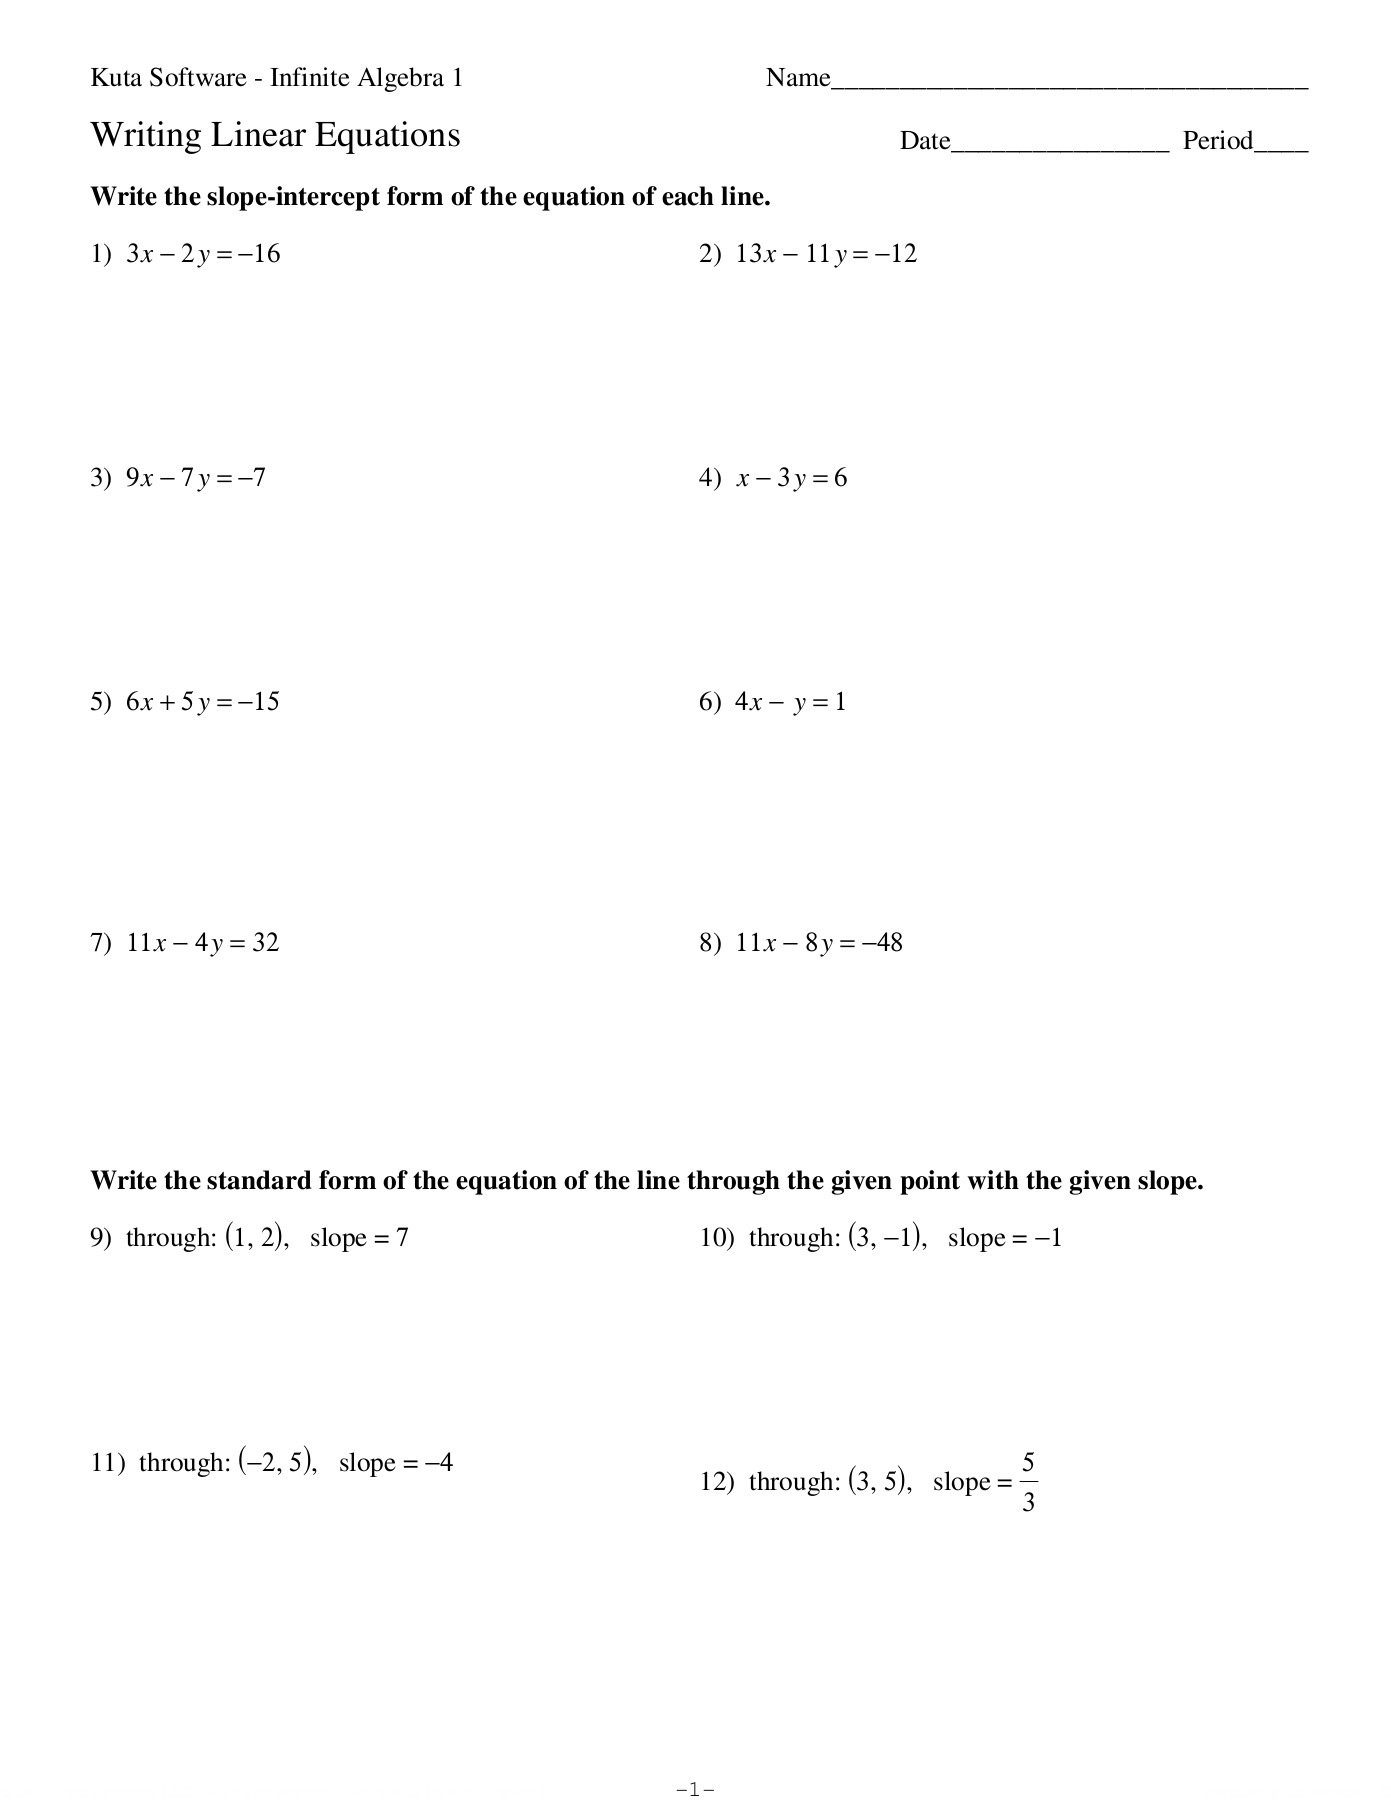 Writing Linear Equations Worksheet Writing Linear Equations Kuta software Llc Pages 1 4